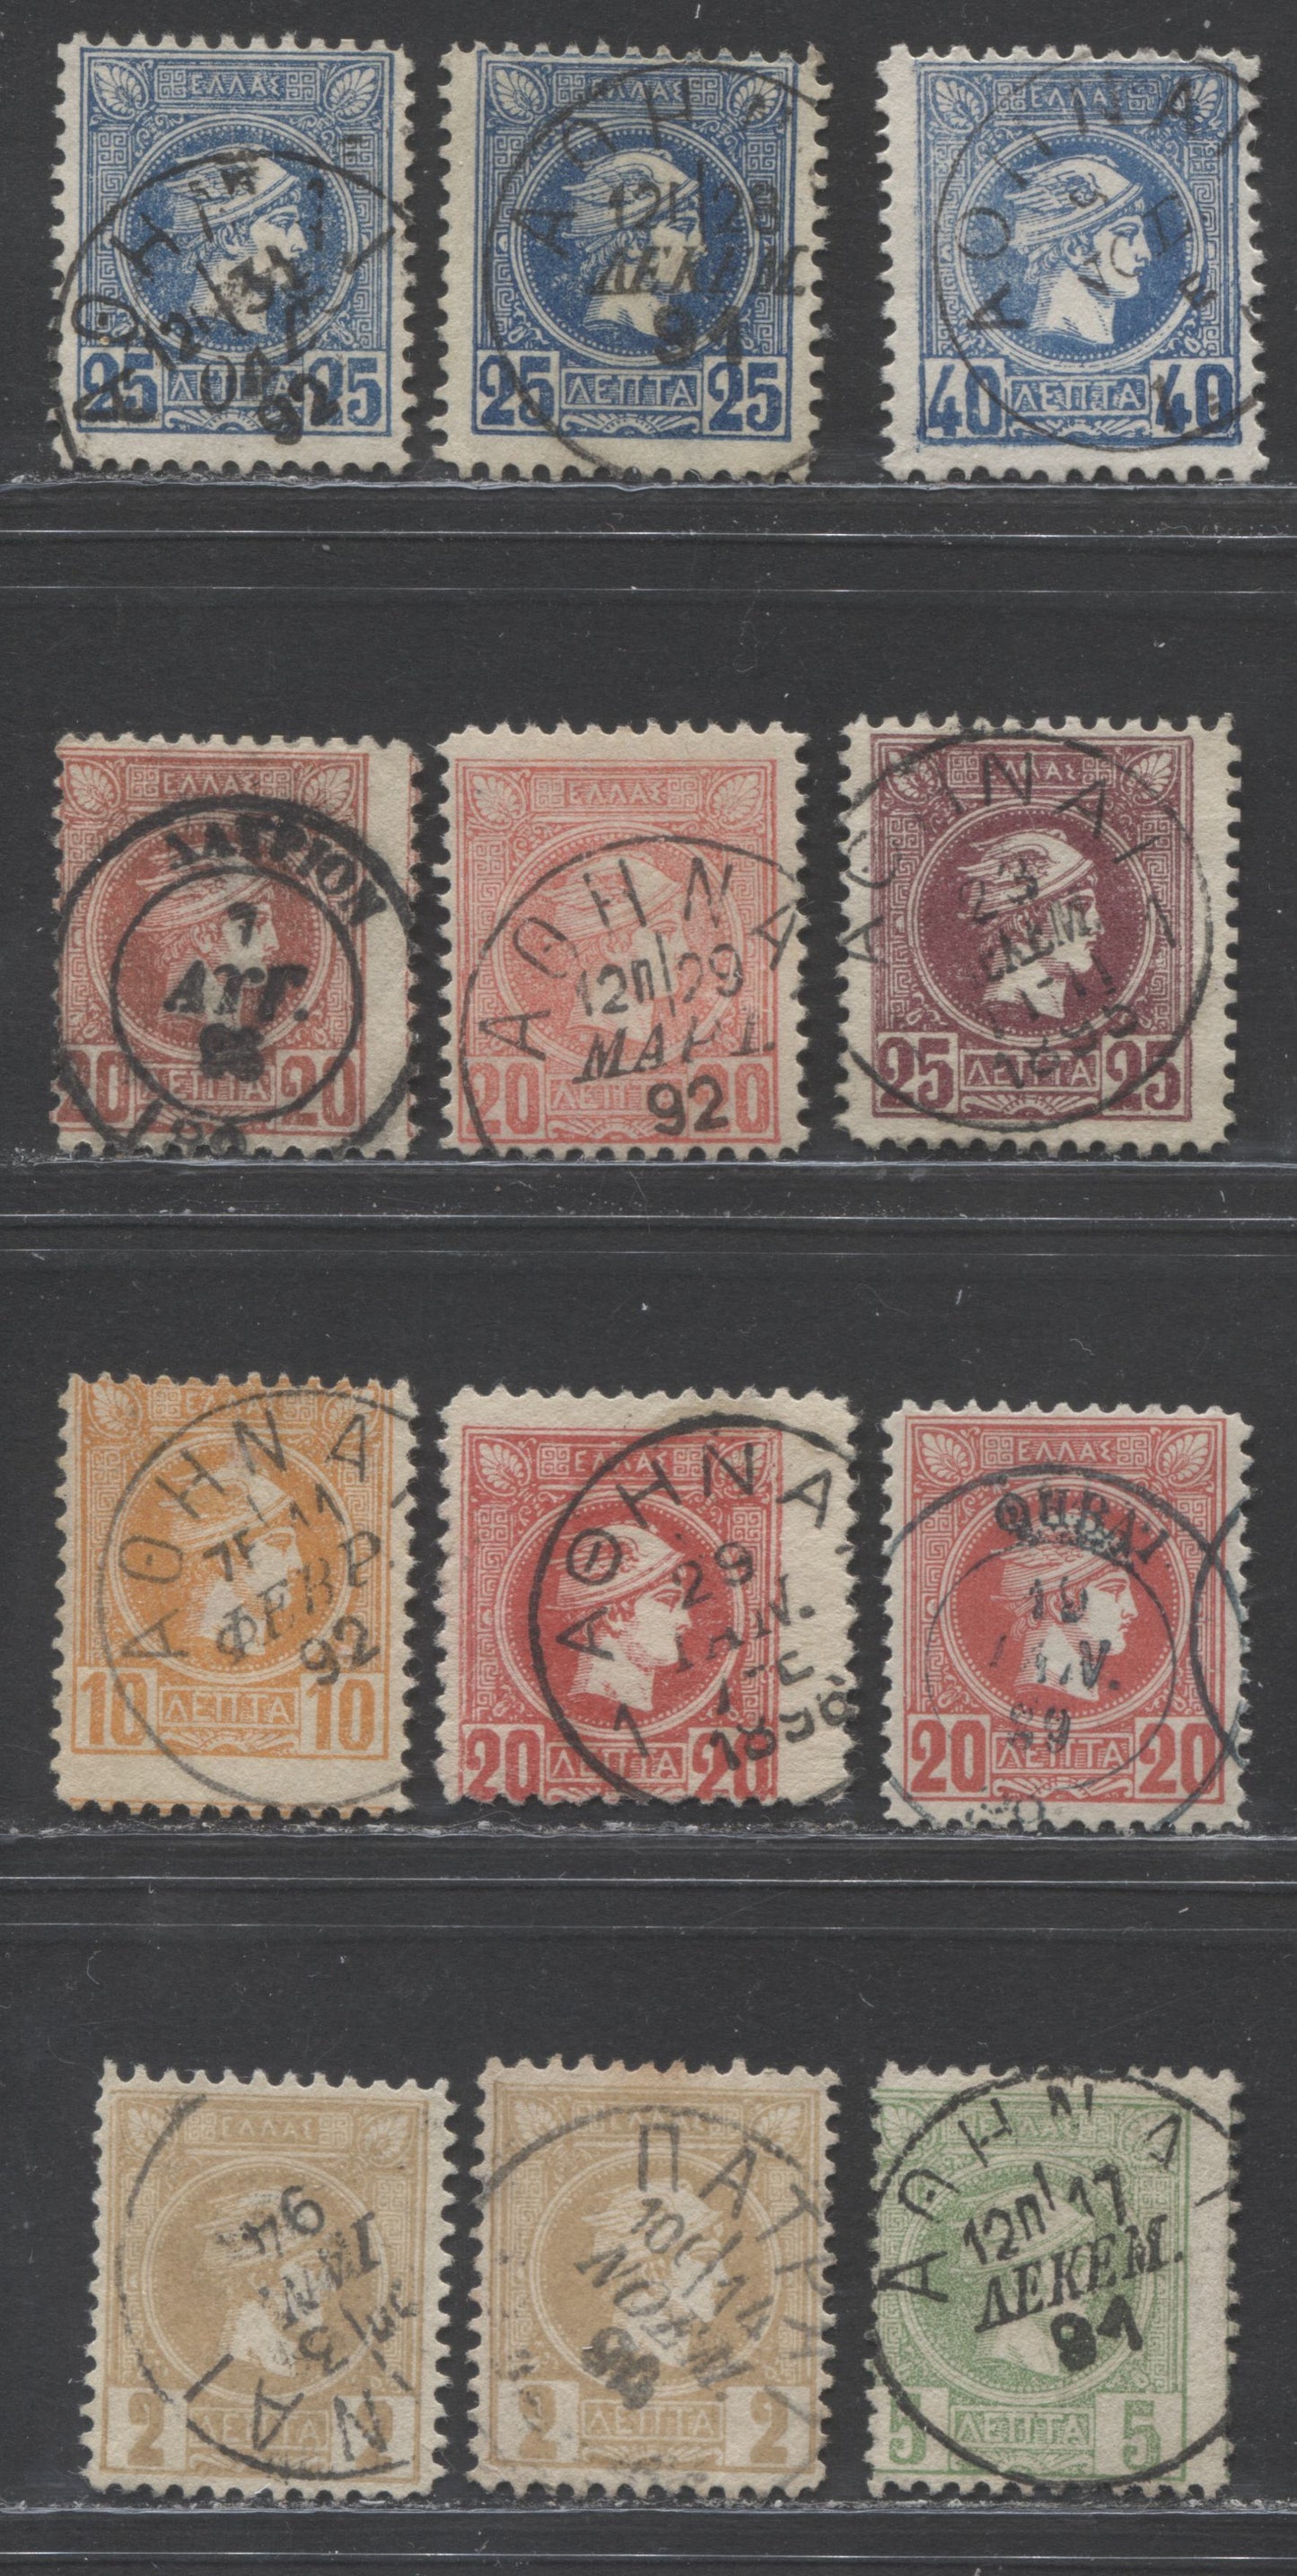 Lot 225 Greece SC#108/115 1889-1895 Small Hermes Head Issue Printed in Athens, A F/VF Used Range Of Singles, Different Shades and Cancels, 2022 Scott Classic Cat.$24.25 USD, Click on Listing to See ALL Pictures